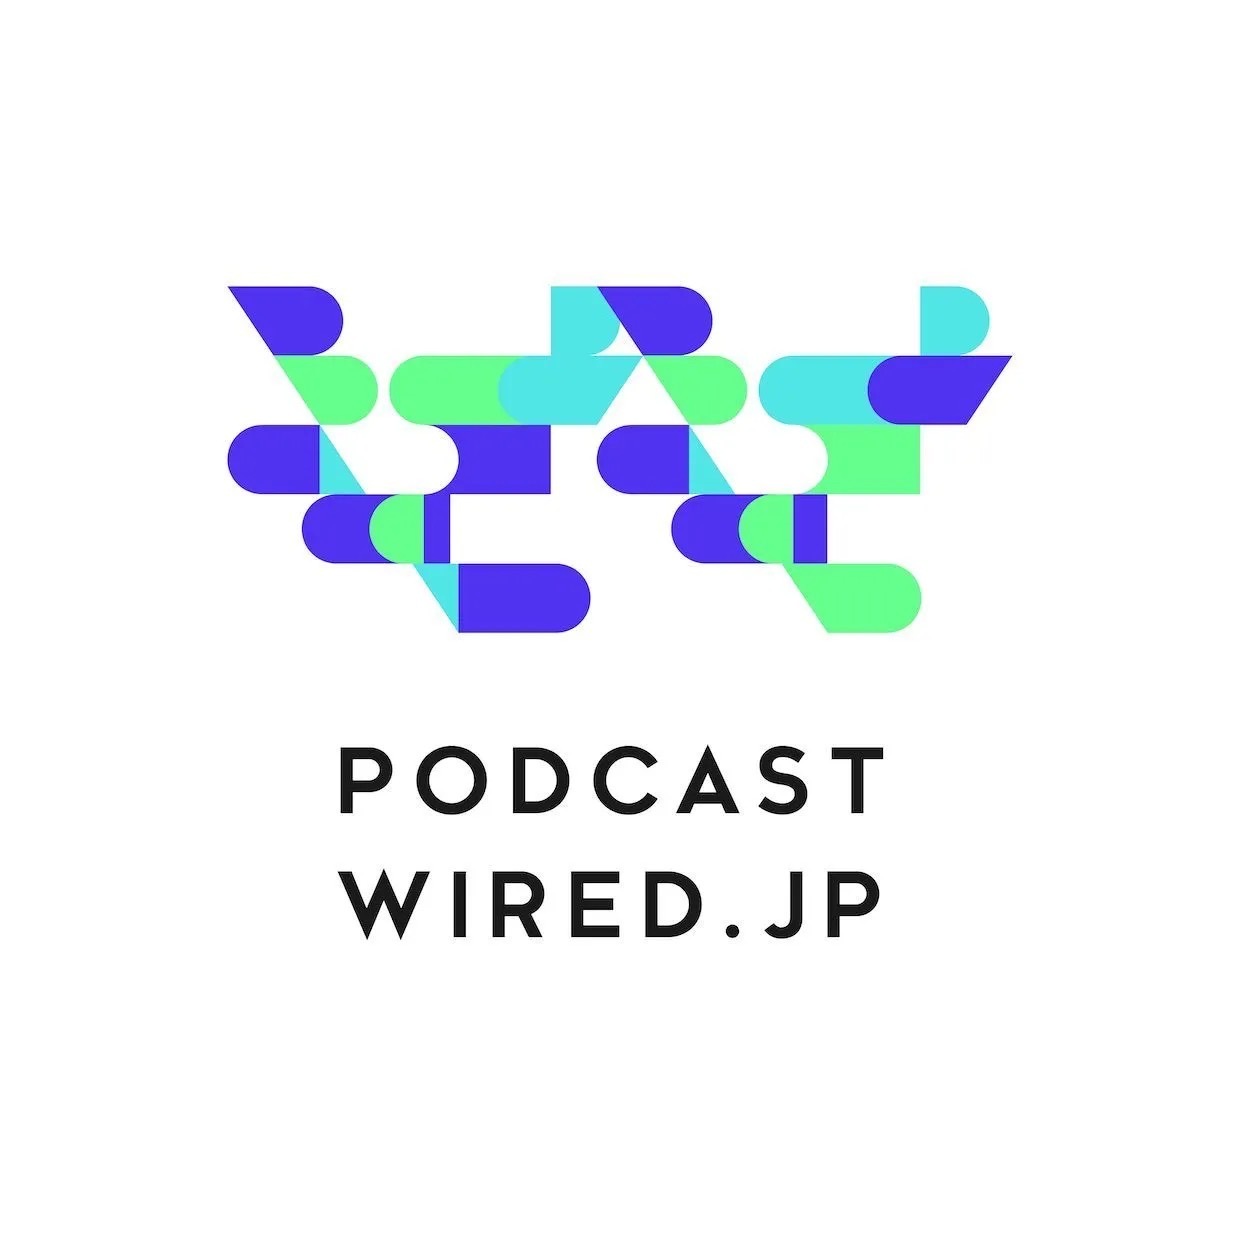 『WIRED』日本版 Podcast「SIAF AS A TOOL」公開収録イメージ